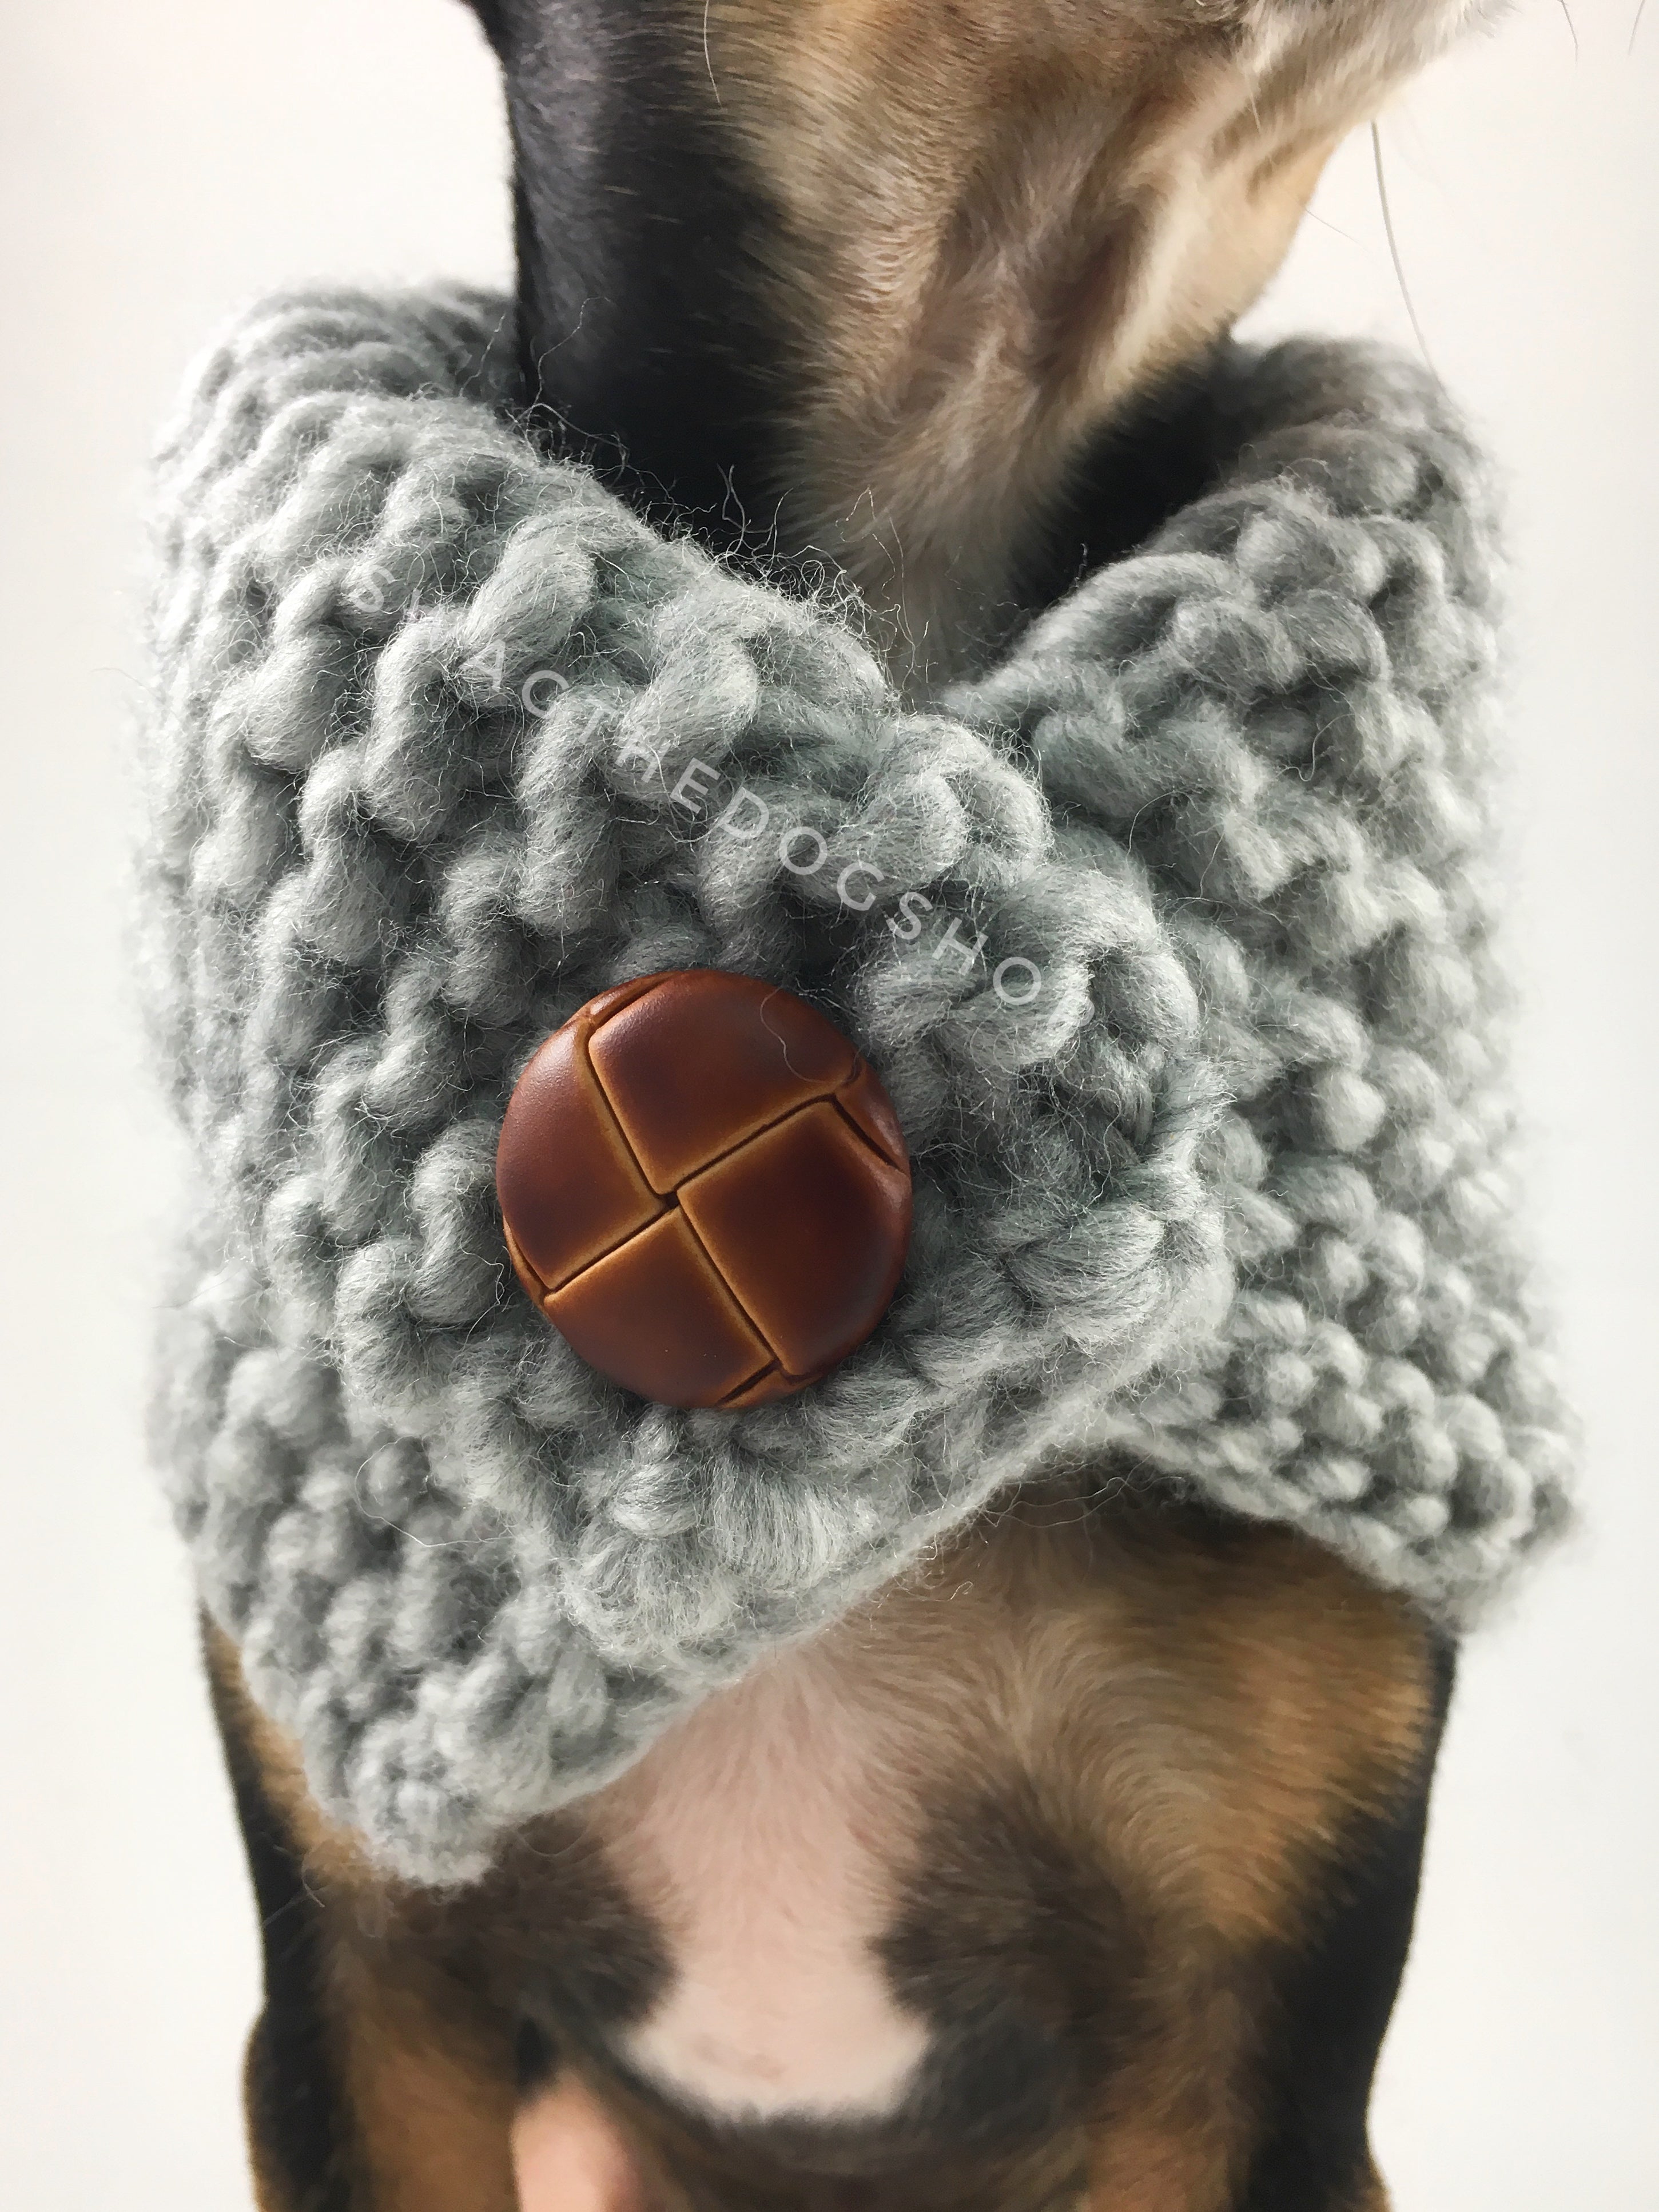 Heather Light Gray Swagsnood - Close Up Neck View of Cute Chihuahua Dog Wearing Heather Light Gray Color Dog Snood with Accent Button